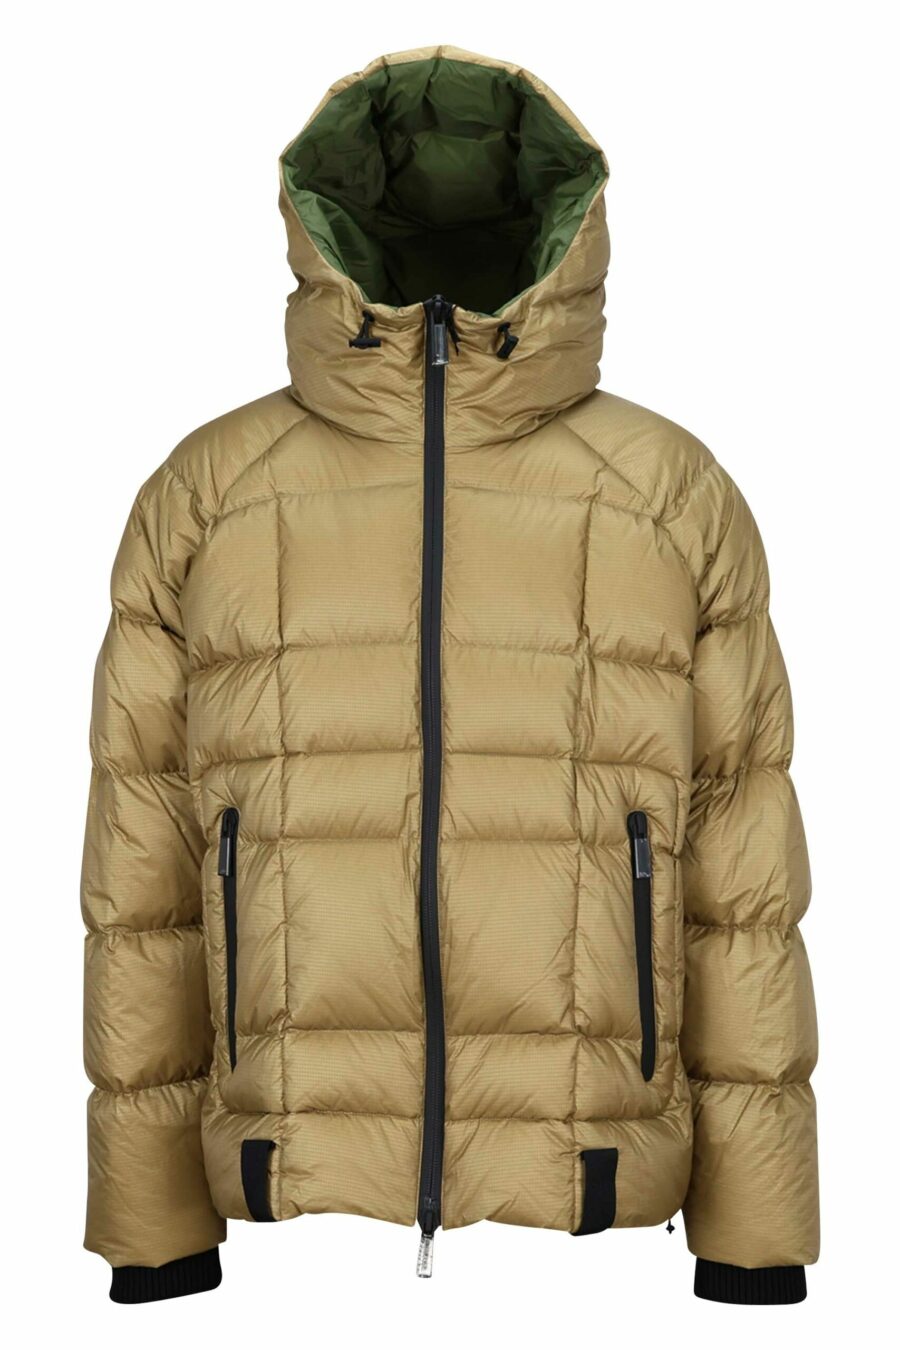 Beige puff kaban puffer jacket with high collar and logo on the back - 8054148052607 scaled